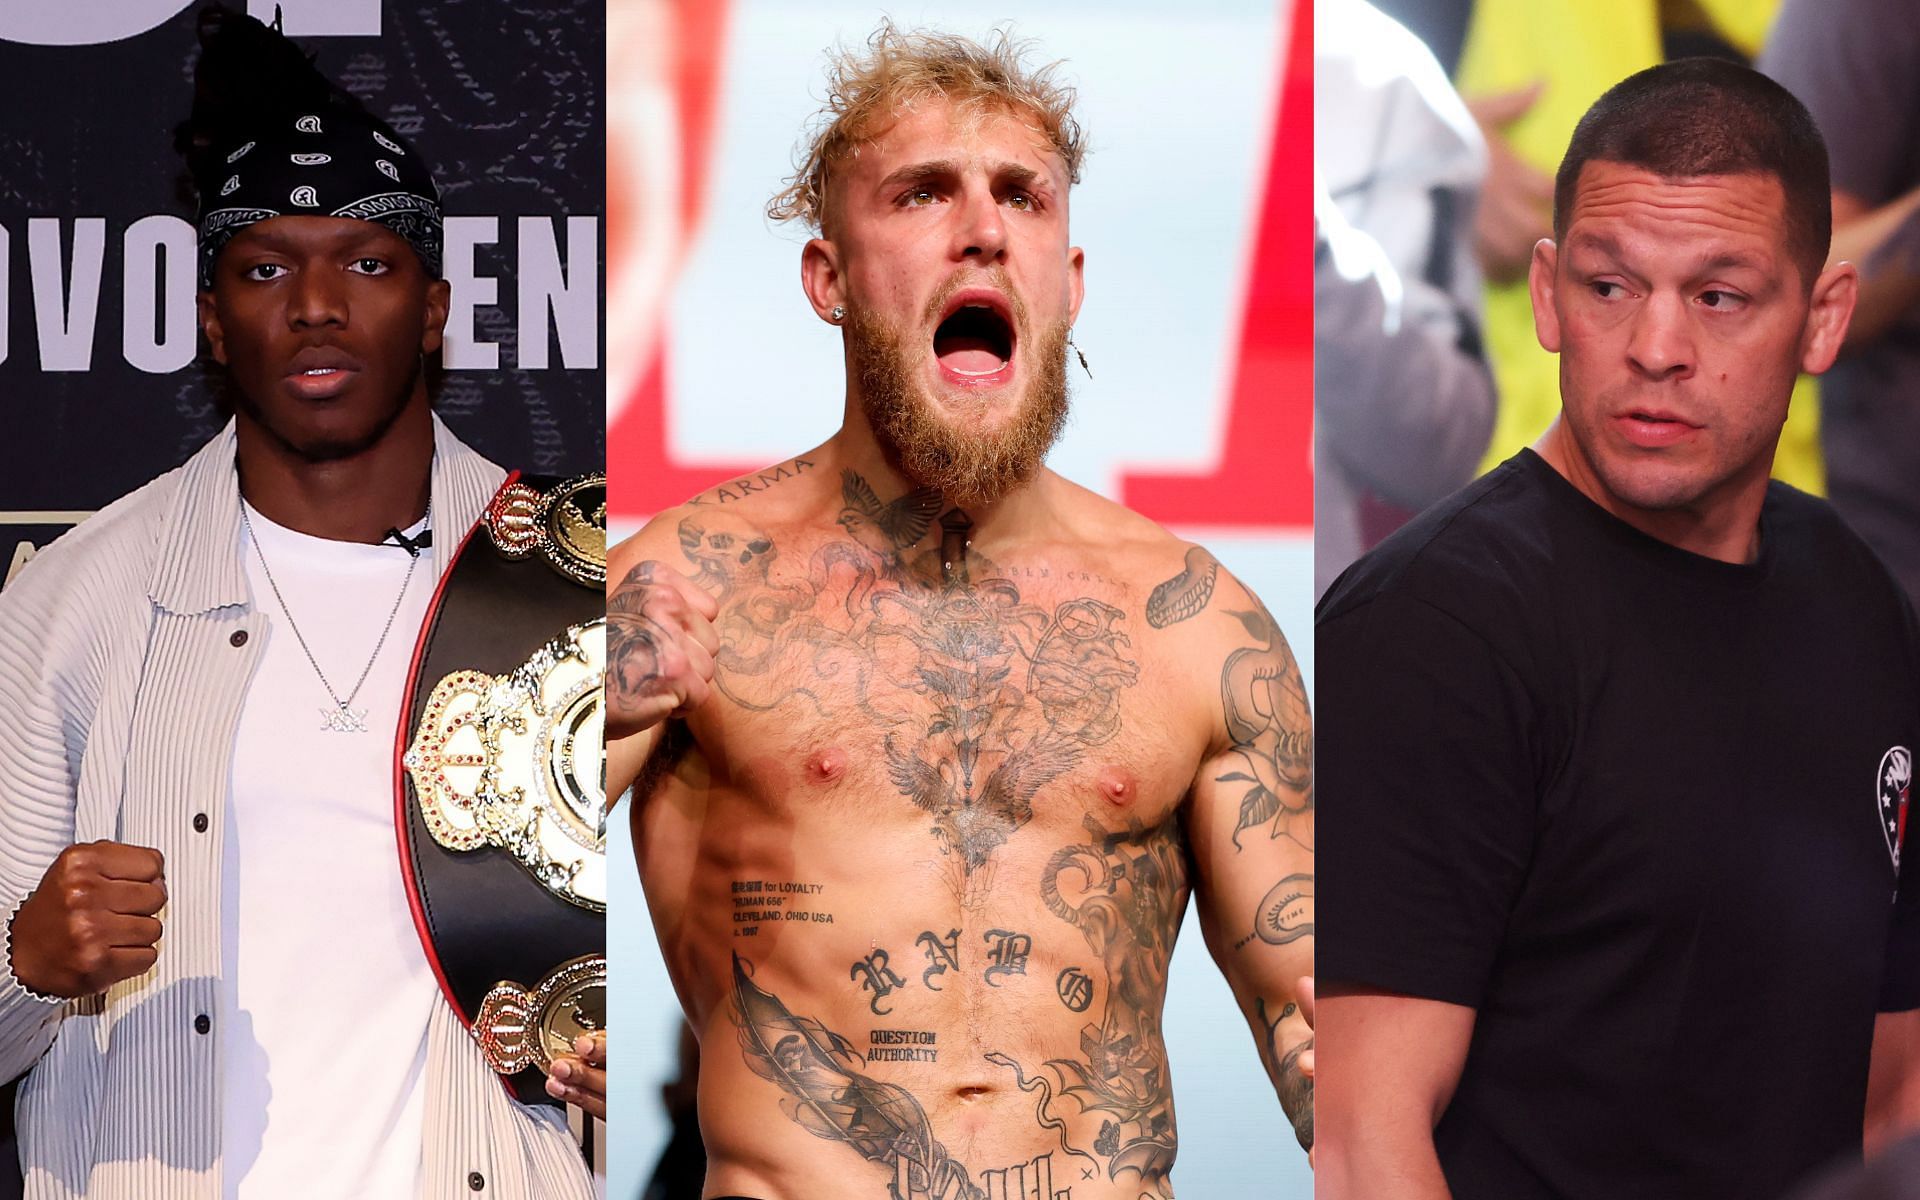 KSI (left) Jake Paul (center), and Nate Diaz (right) (Image credits Getty Images)